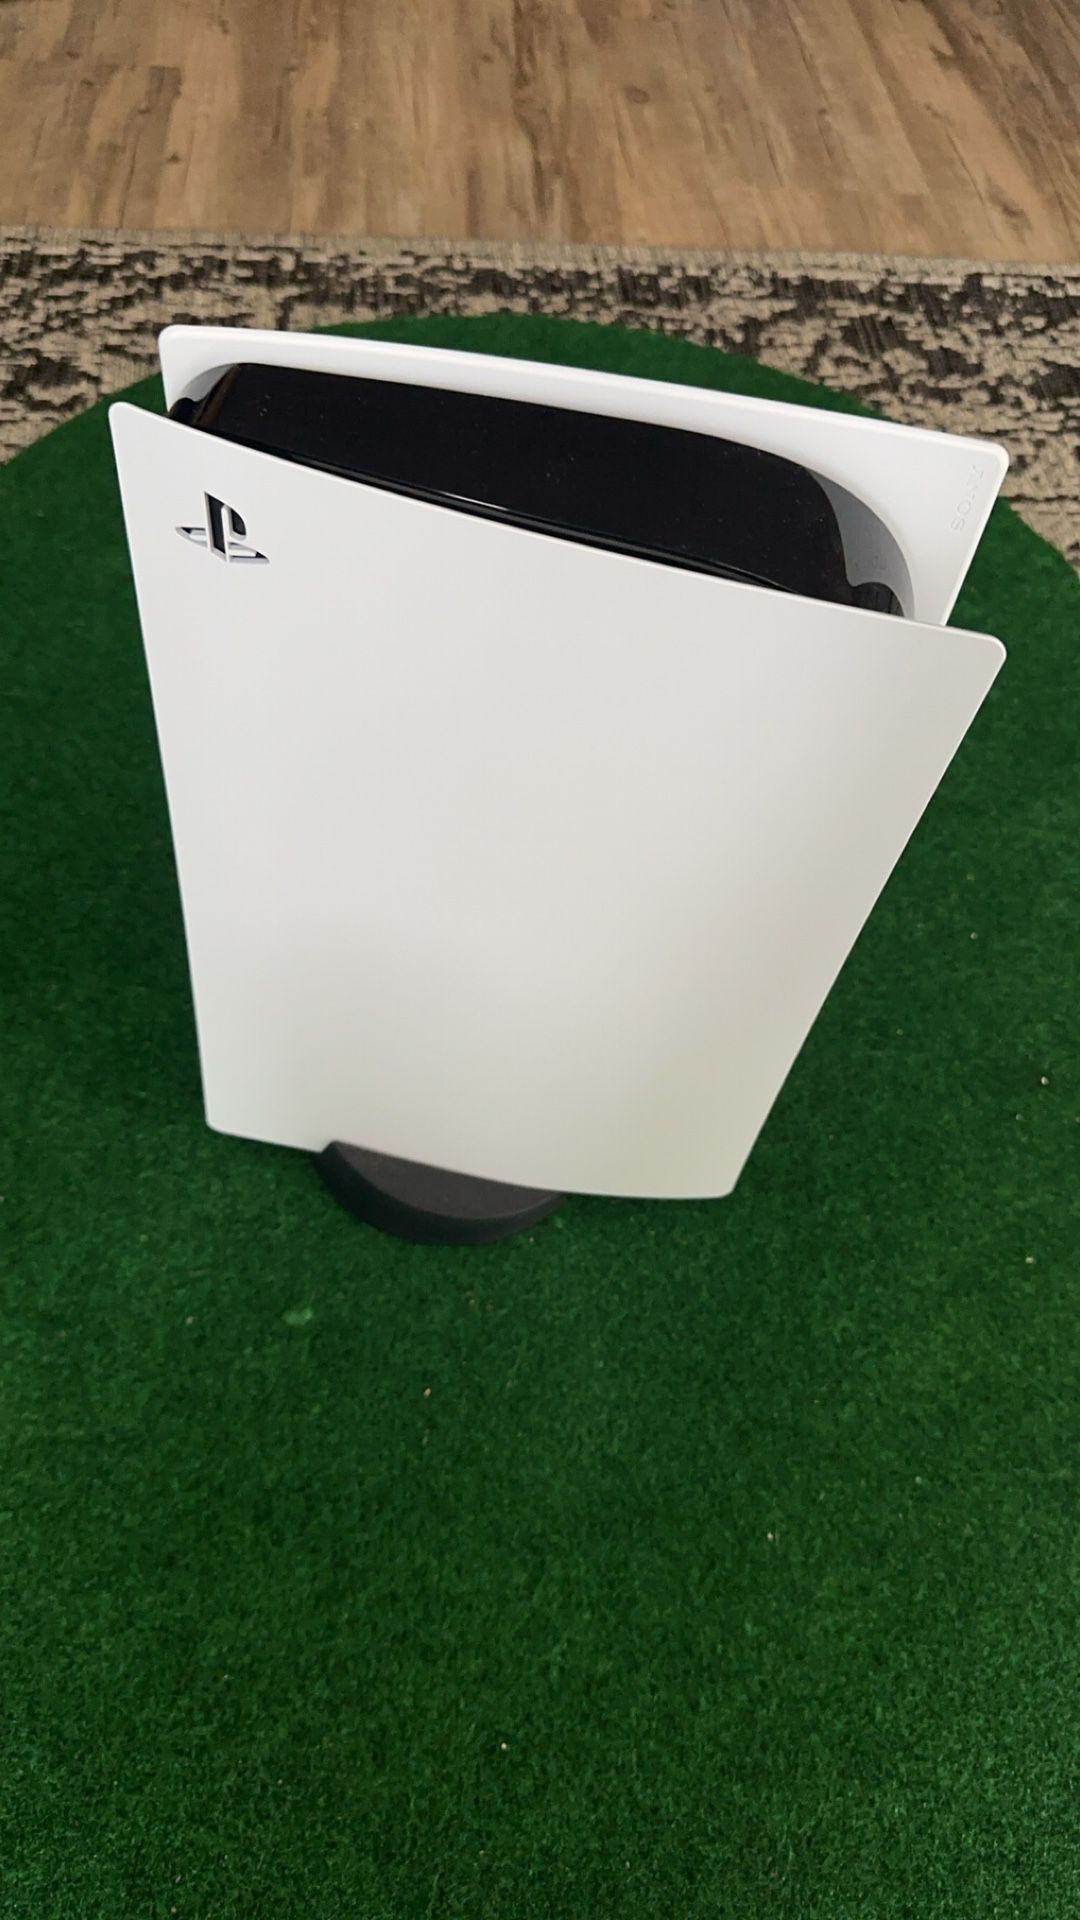 PS5 (disc drive edition), with 1 controller